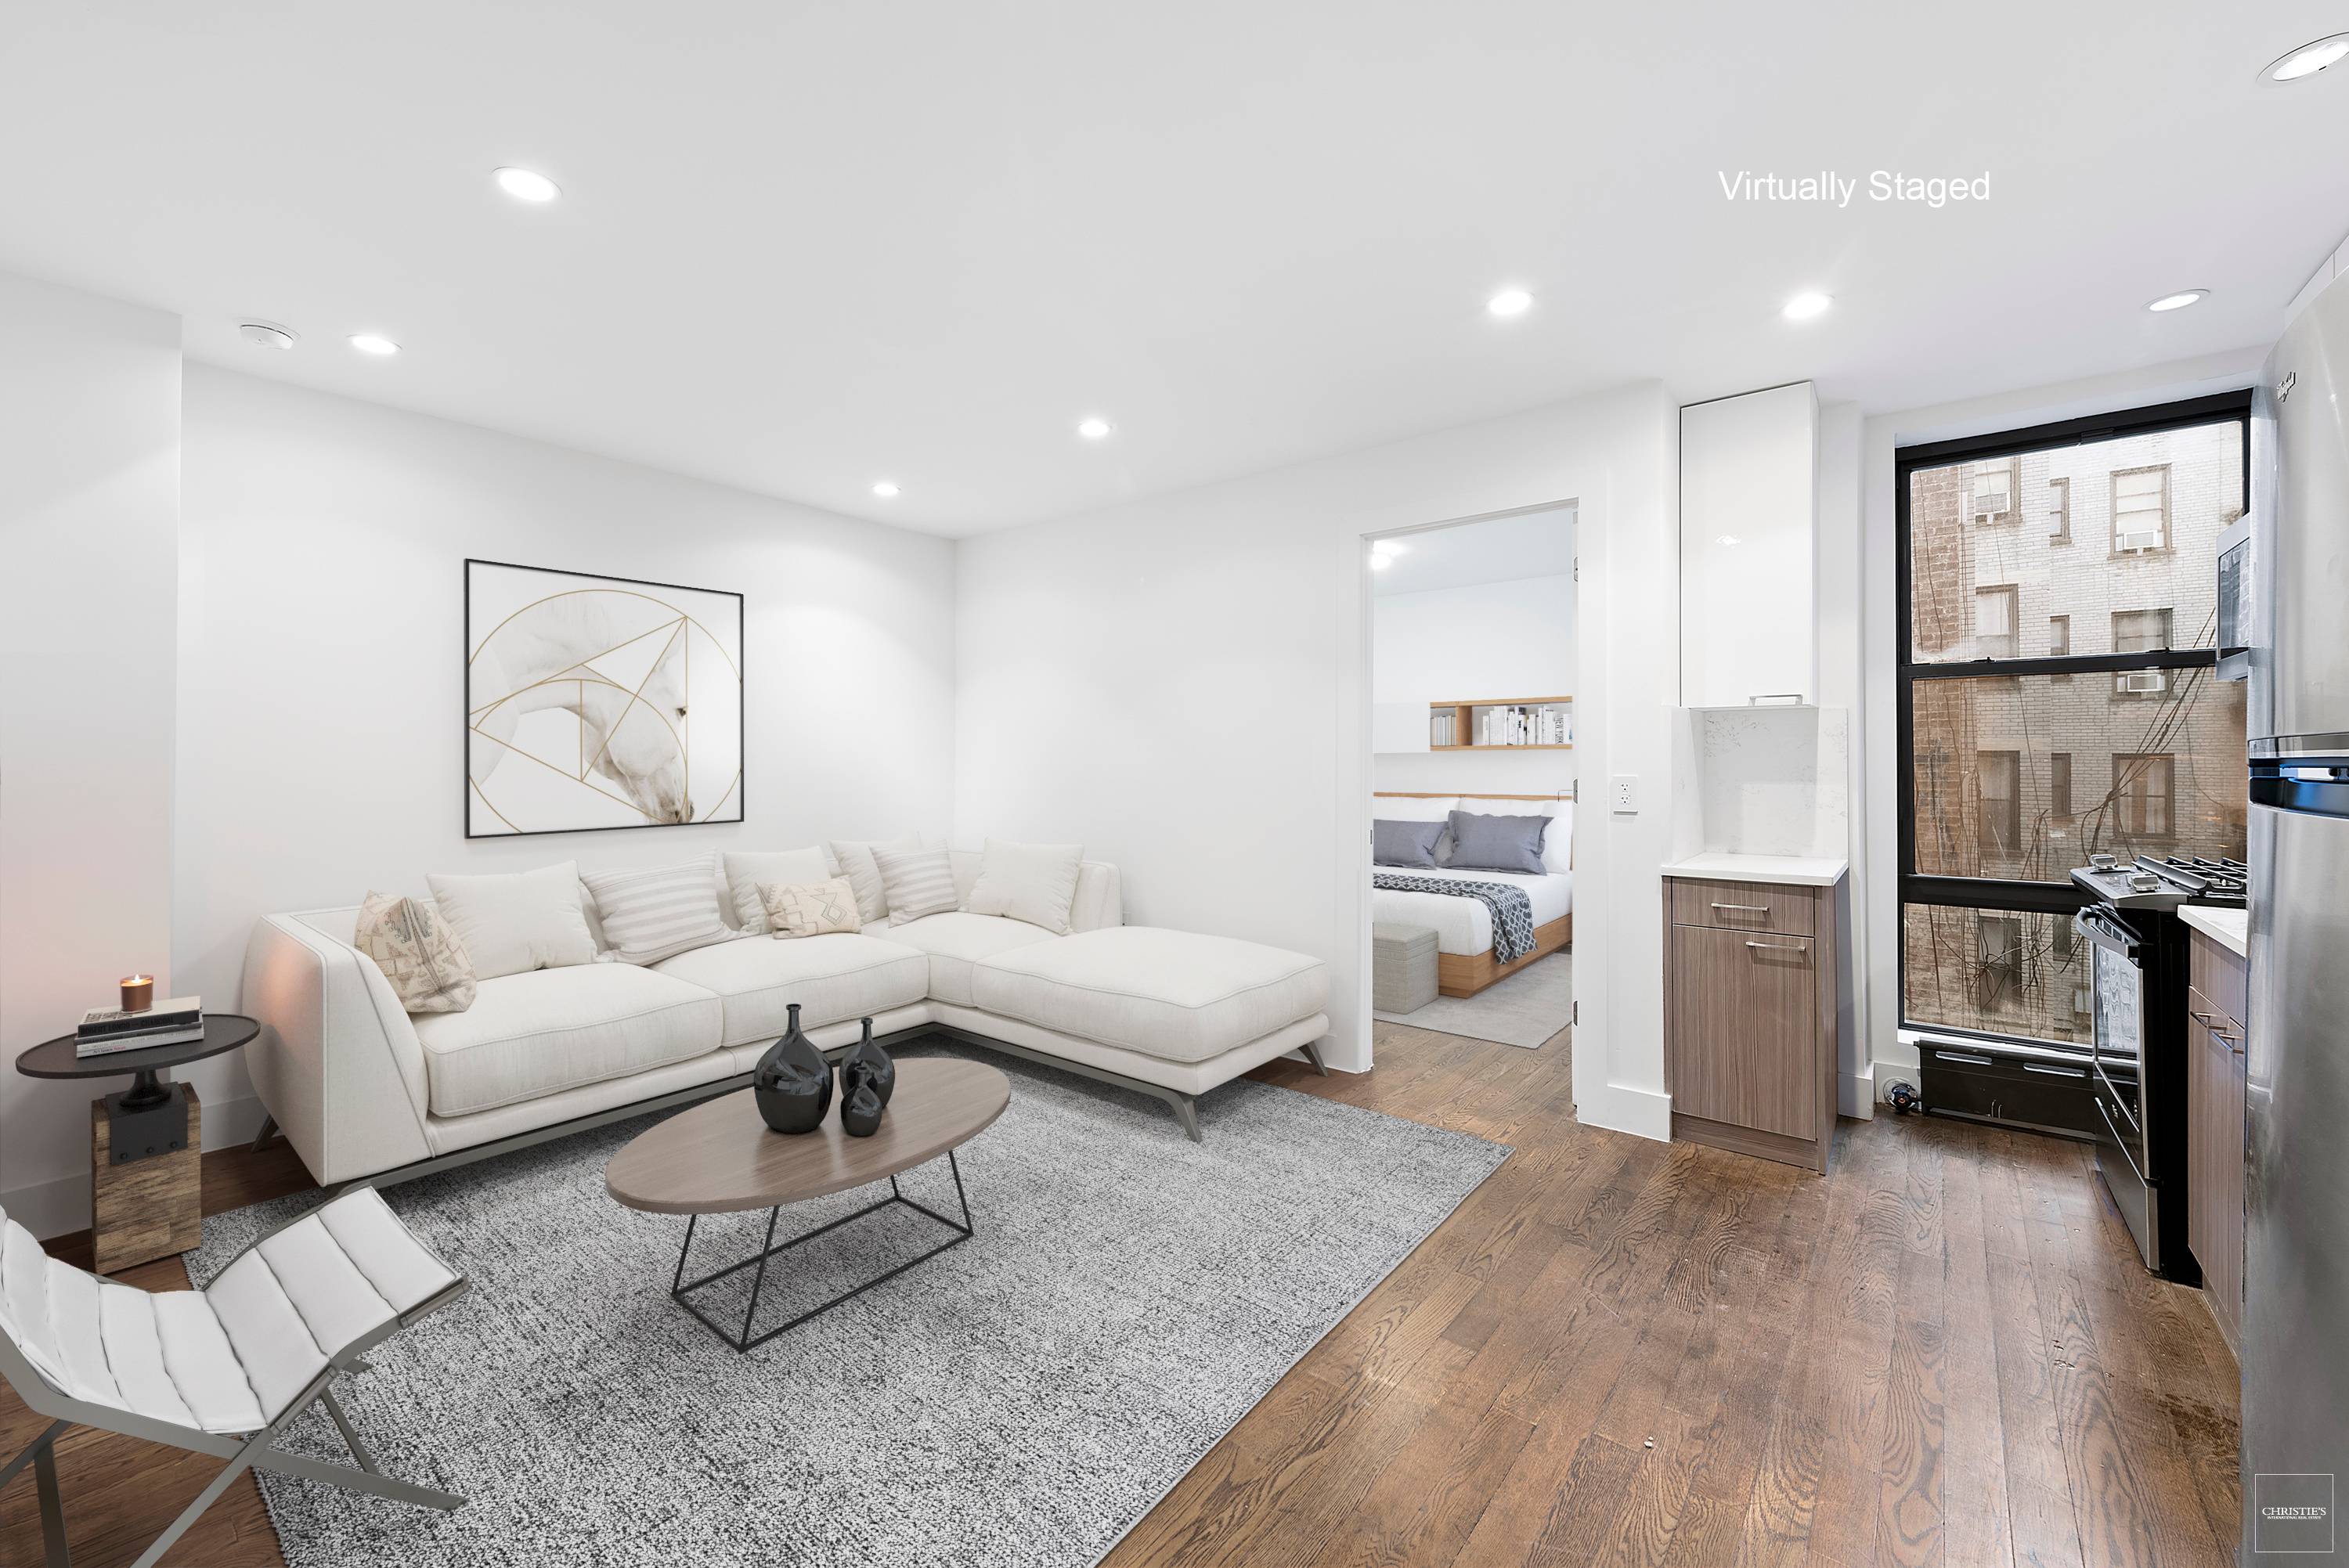 Welcome to Brooklyn Flats, a mid century condo conversion development in historic Flatbush, one of New York City's oldest neighborhoods.